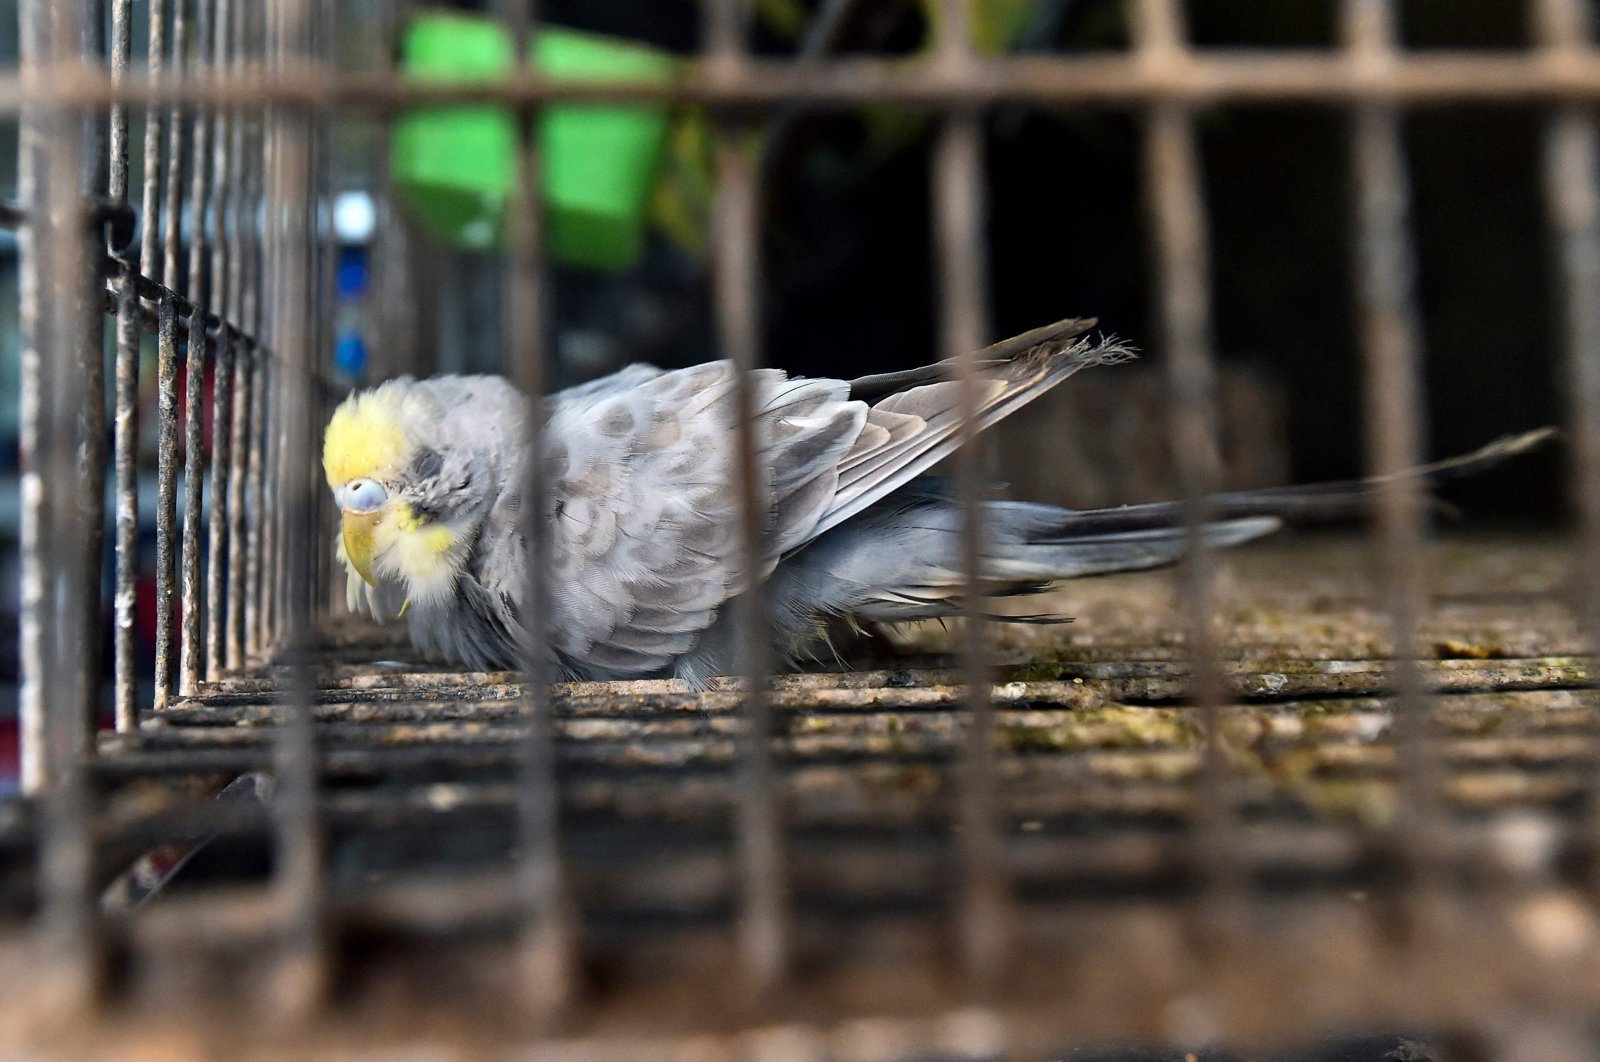 A bird is seen in a cage inside a closed pet shop in Dhaka, Bangladesh, July 14, 2021. (AFP Photo)